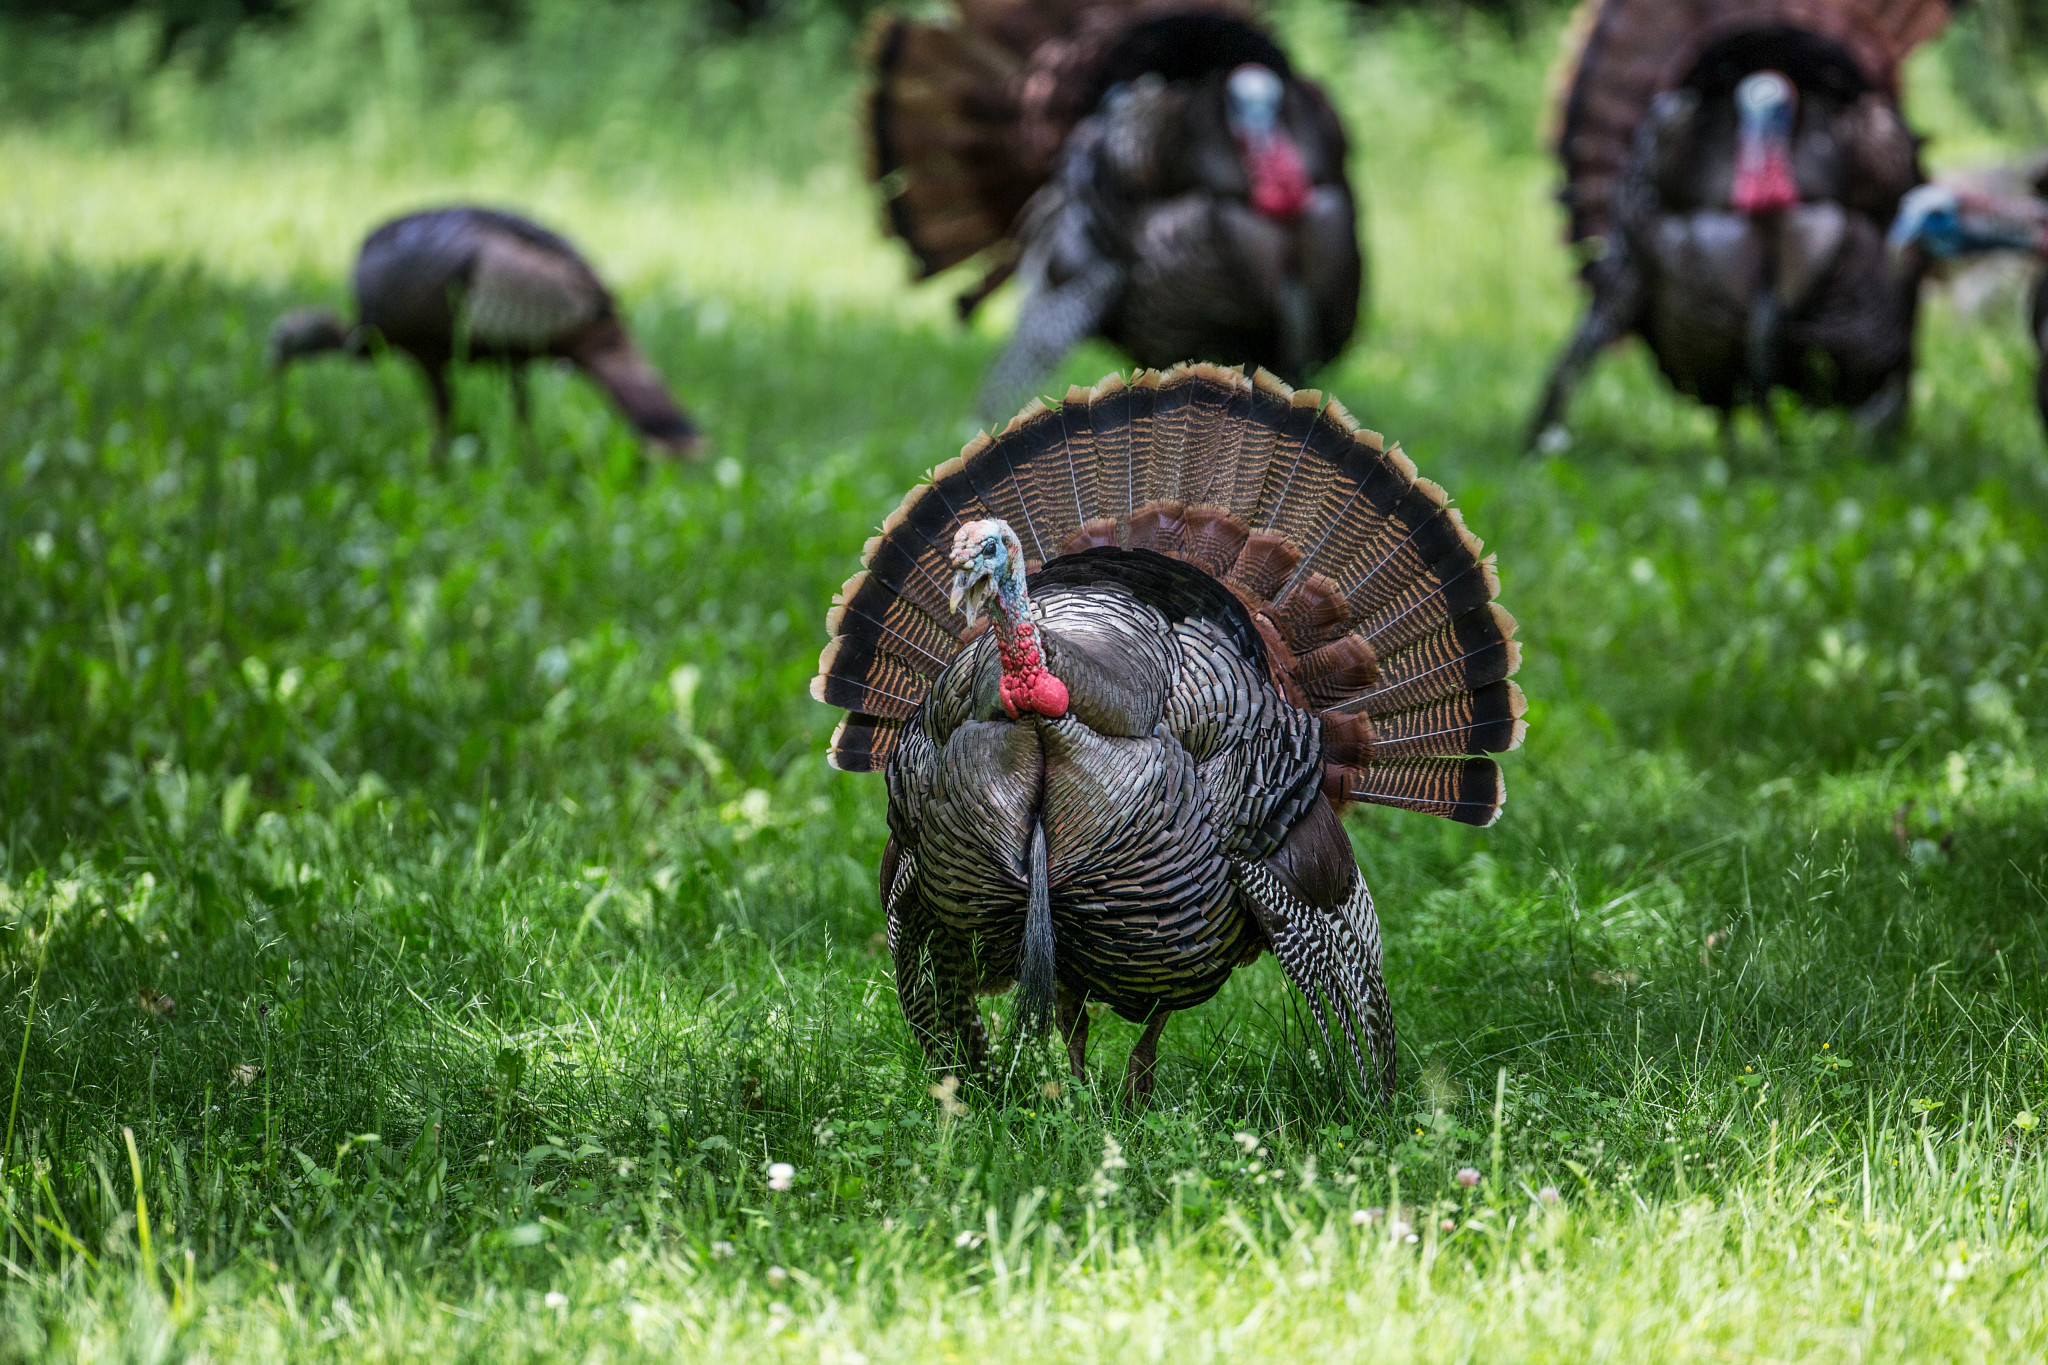 male turkey displaying in a field among other turkeys